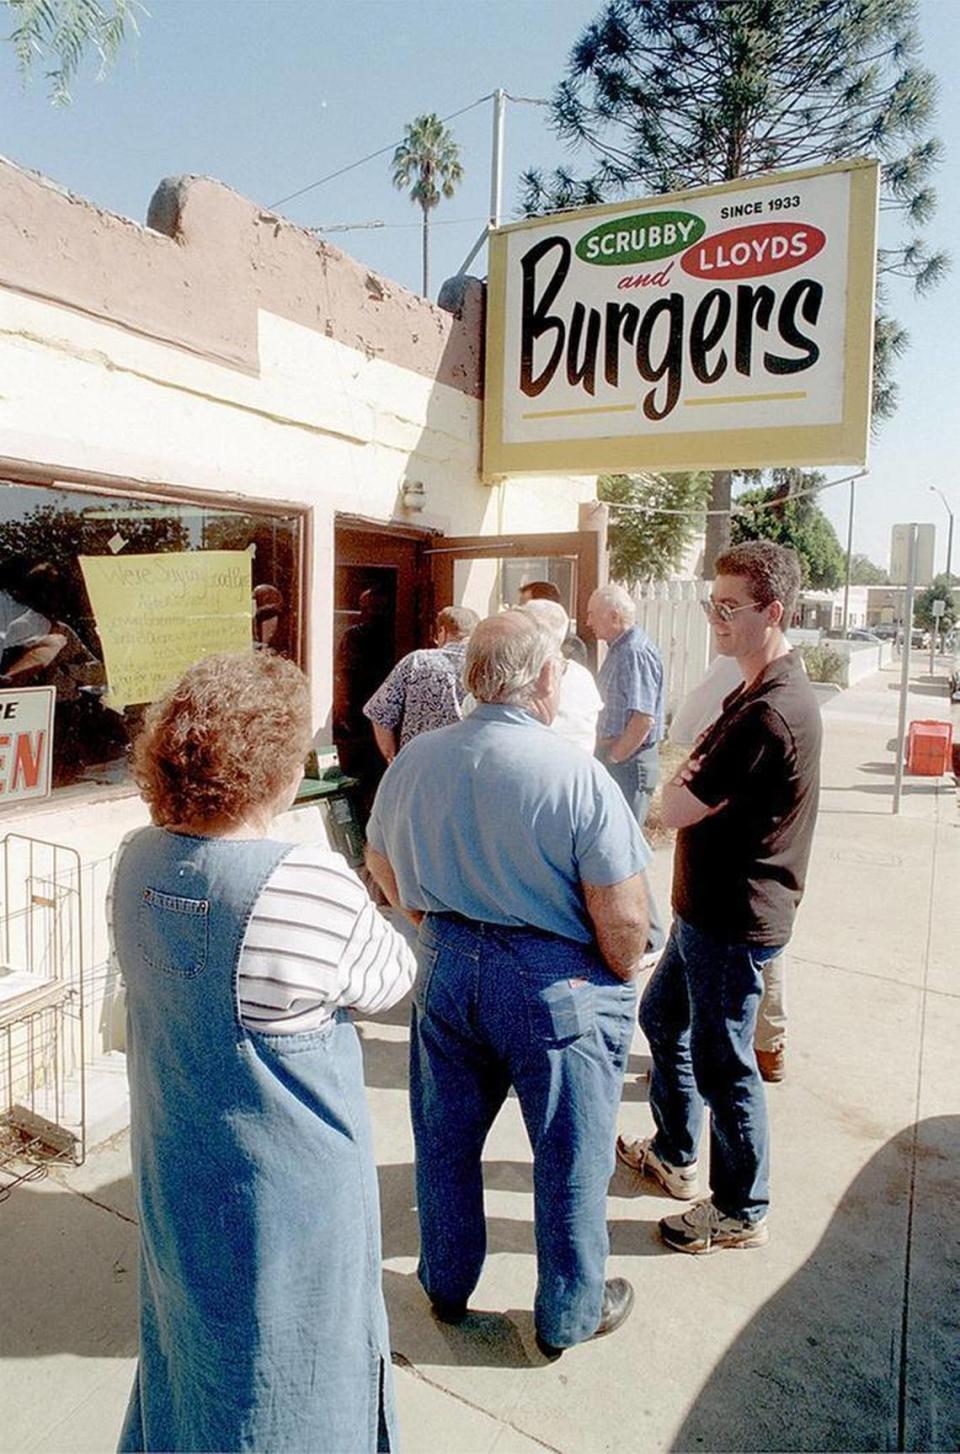 Some fans of Scrubby and Lloyd’s waited in line up to an hour Tuesday, Oct. 27, 1998, to get one last taste of the San Luis Obispo restaurant’s famous burgers.